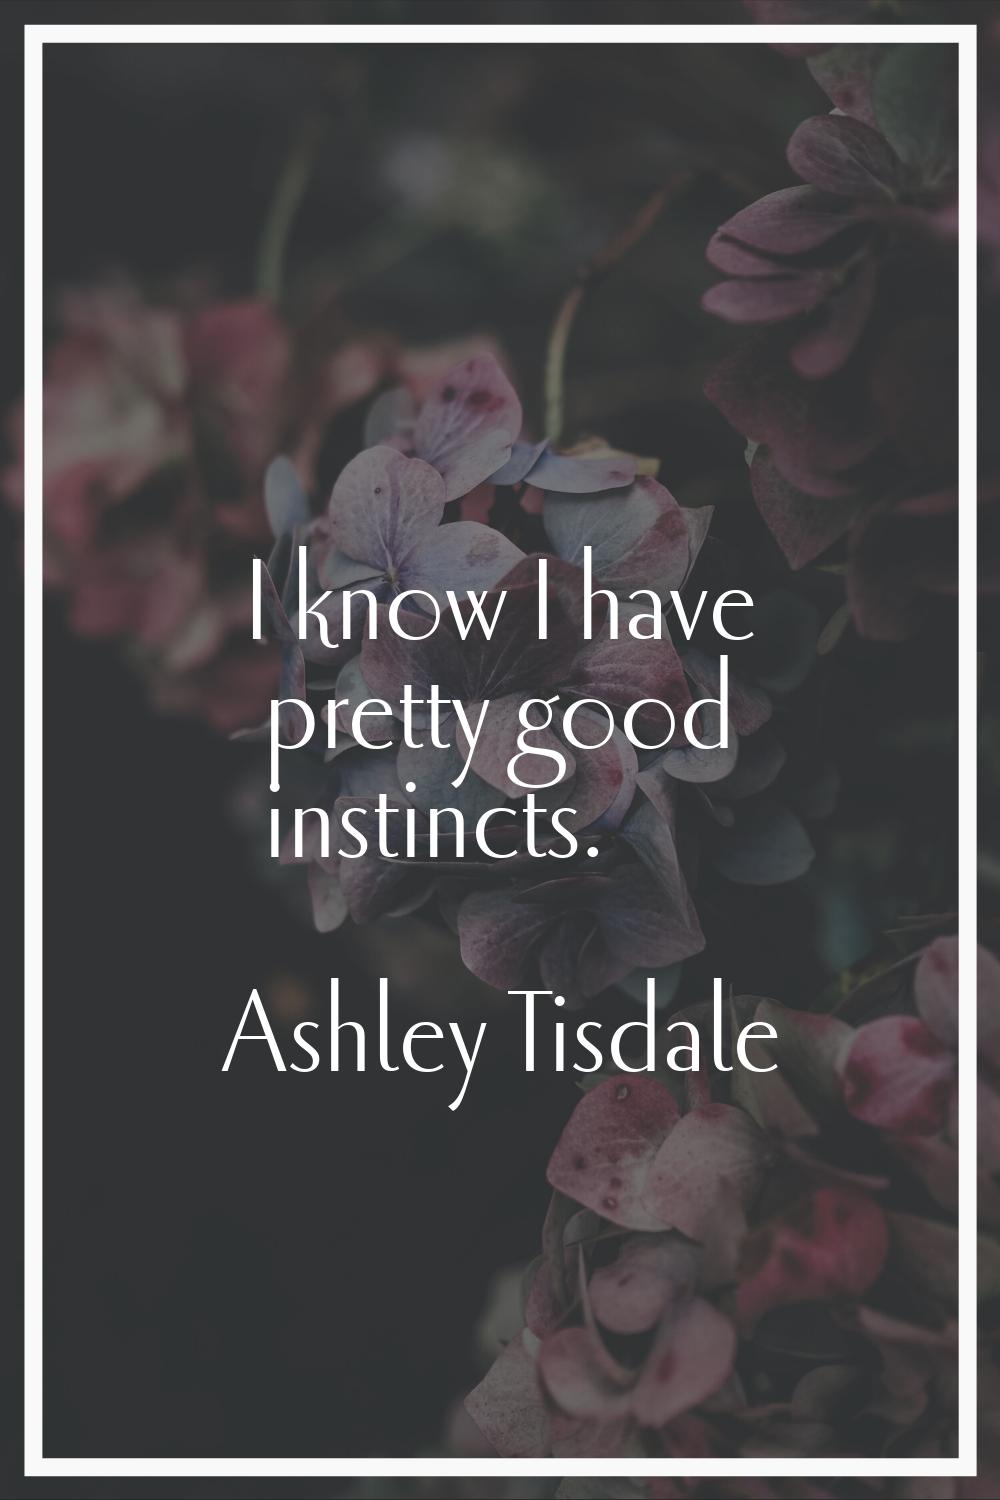 I know I have pretty good instincts.